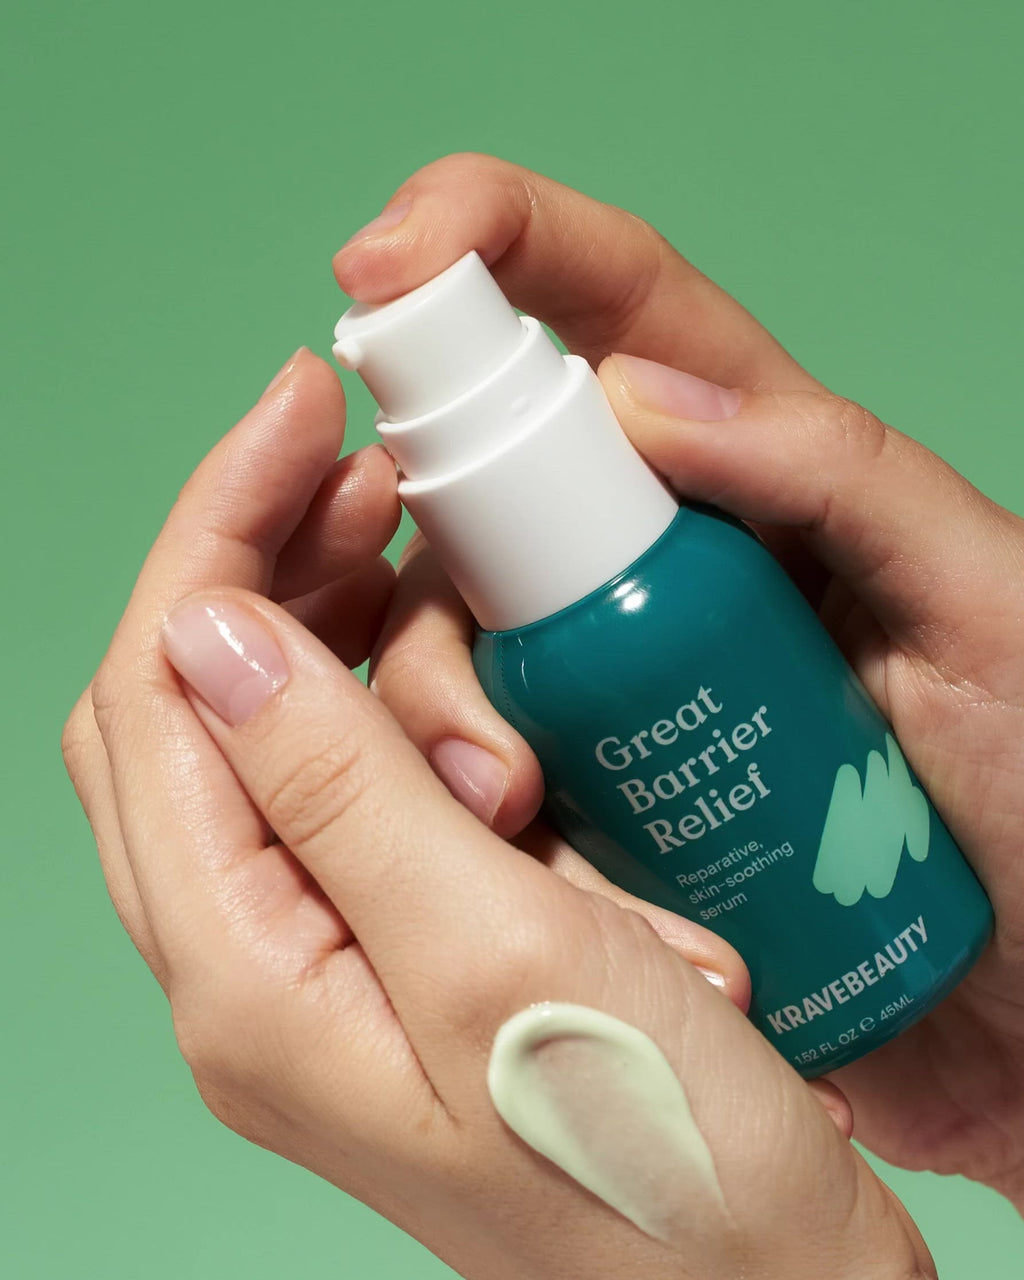 Hand pumping Great Barrier Relief serum onto finger